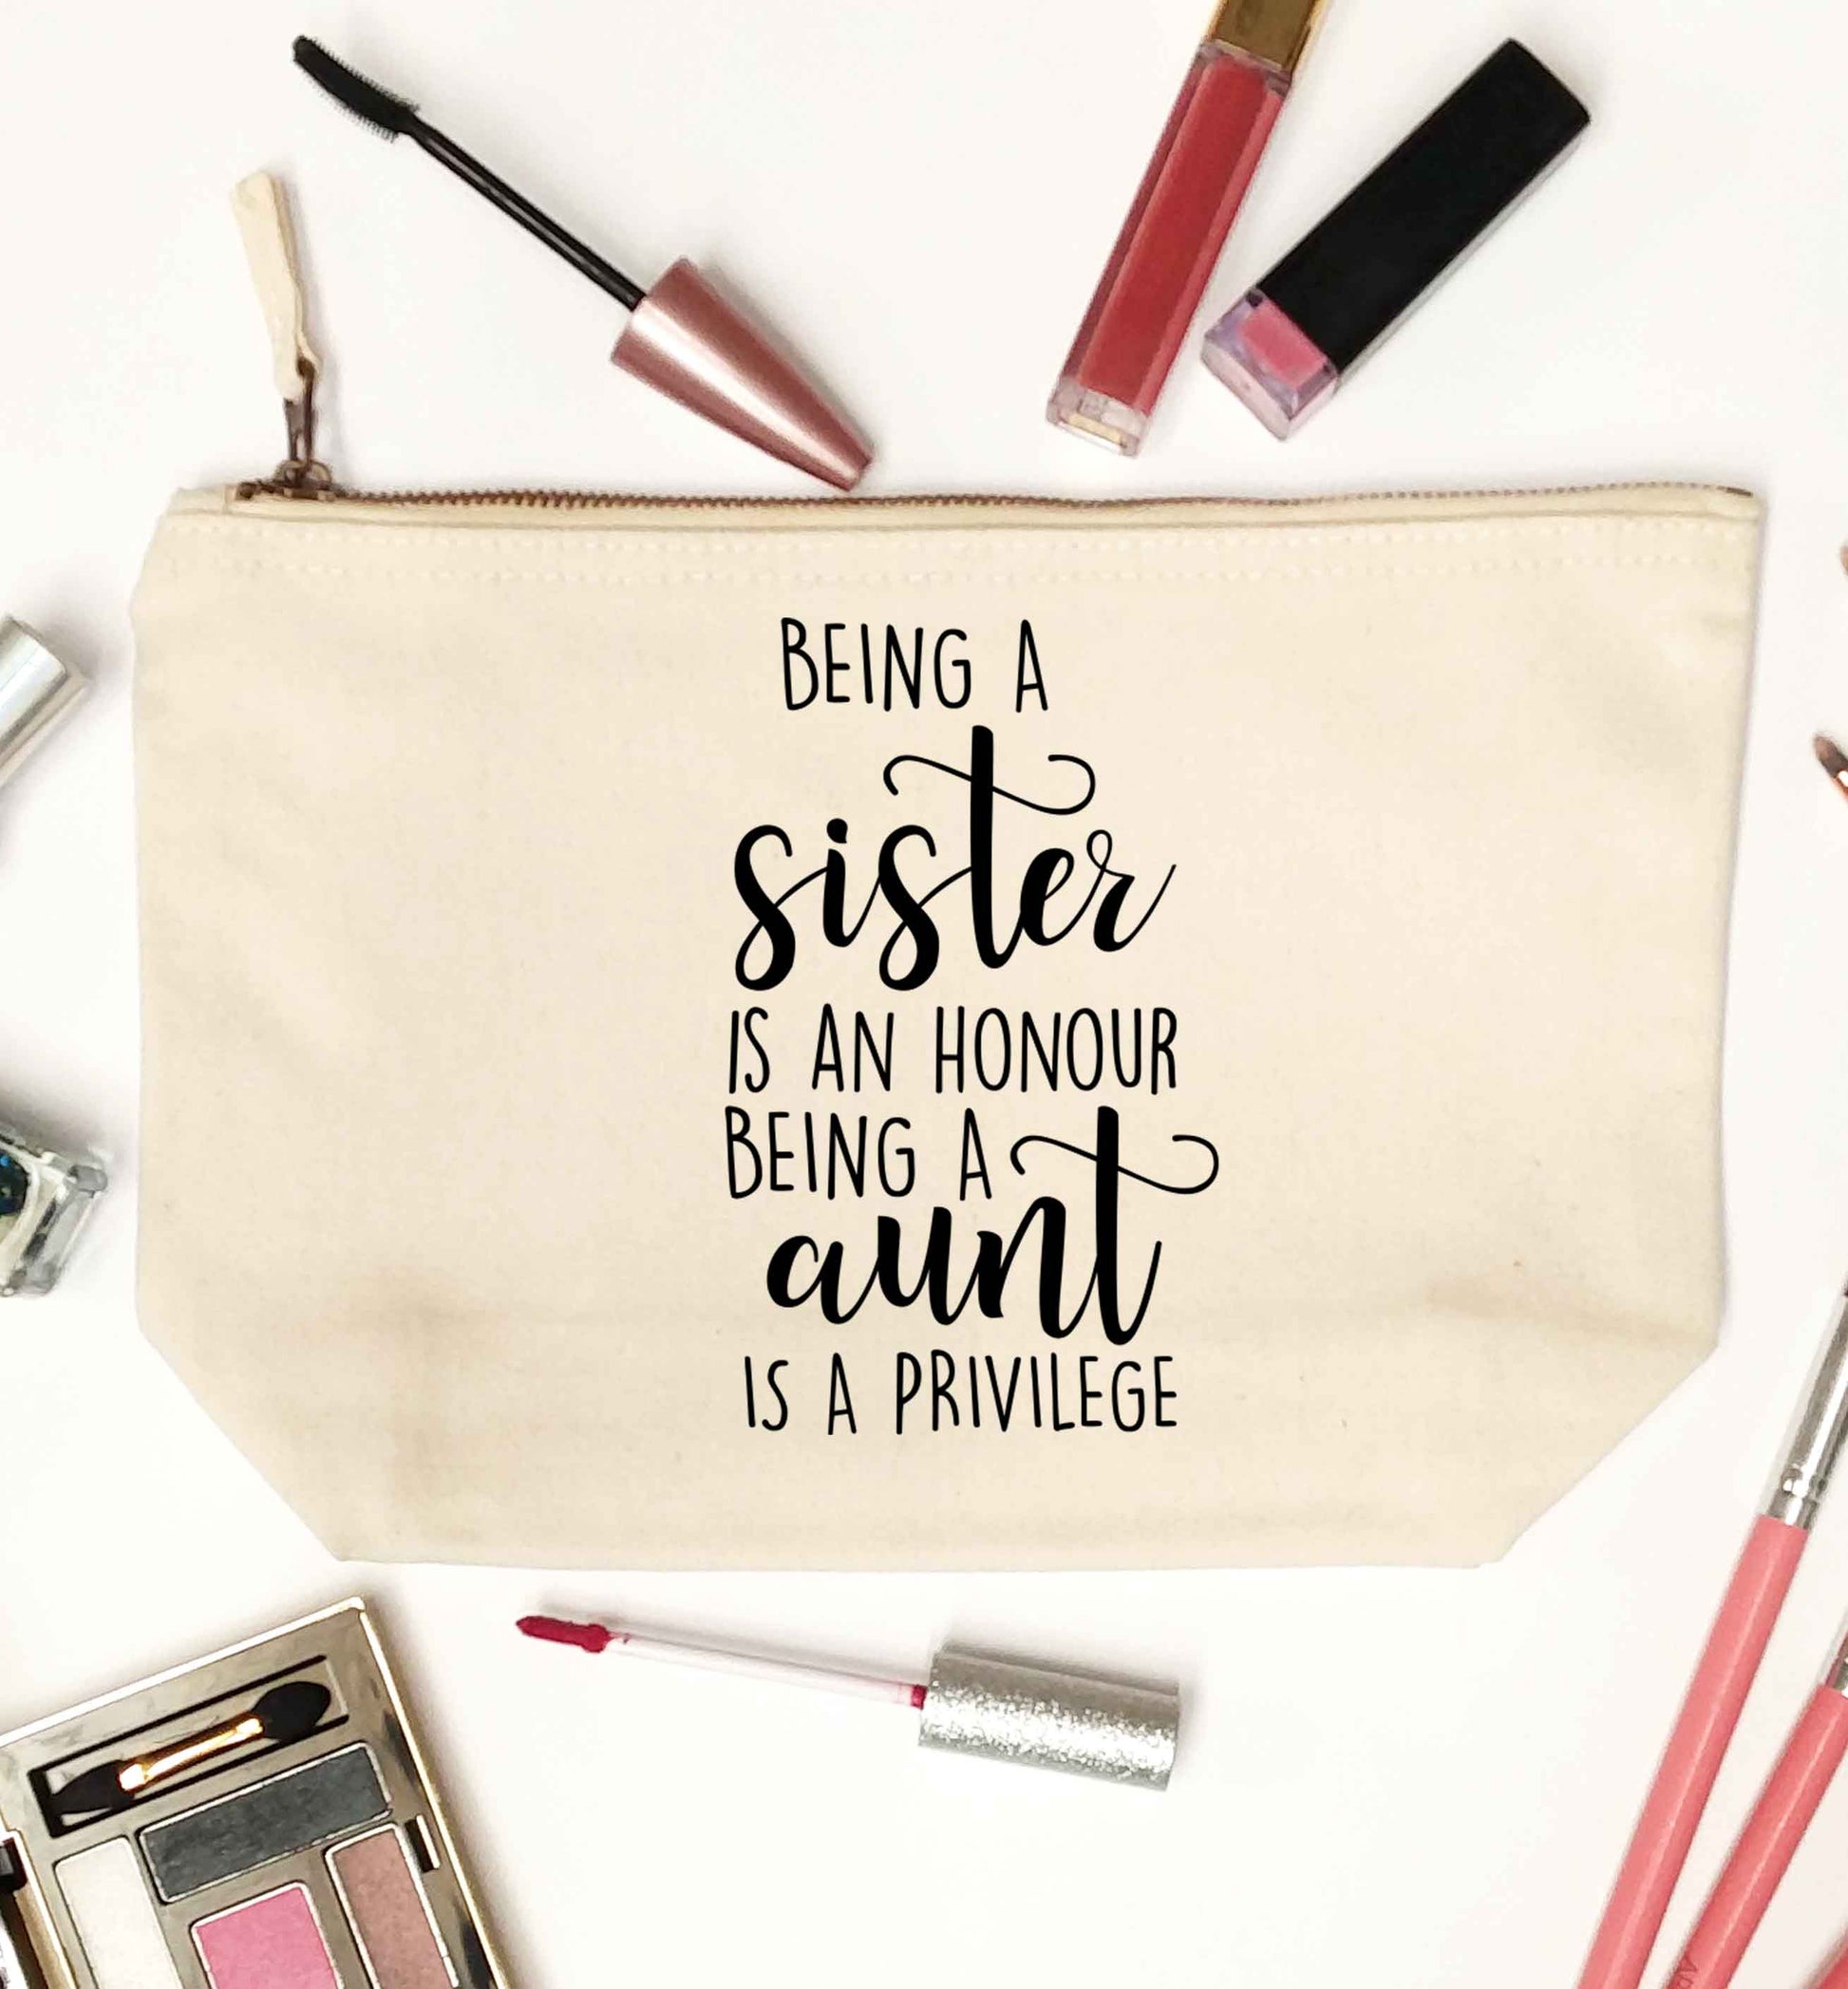 Being a sister is an honour being an auntie is a privilege natural makeup bag